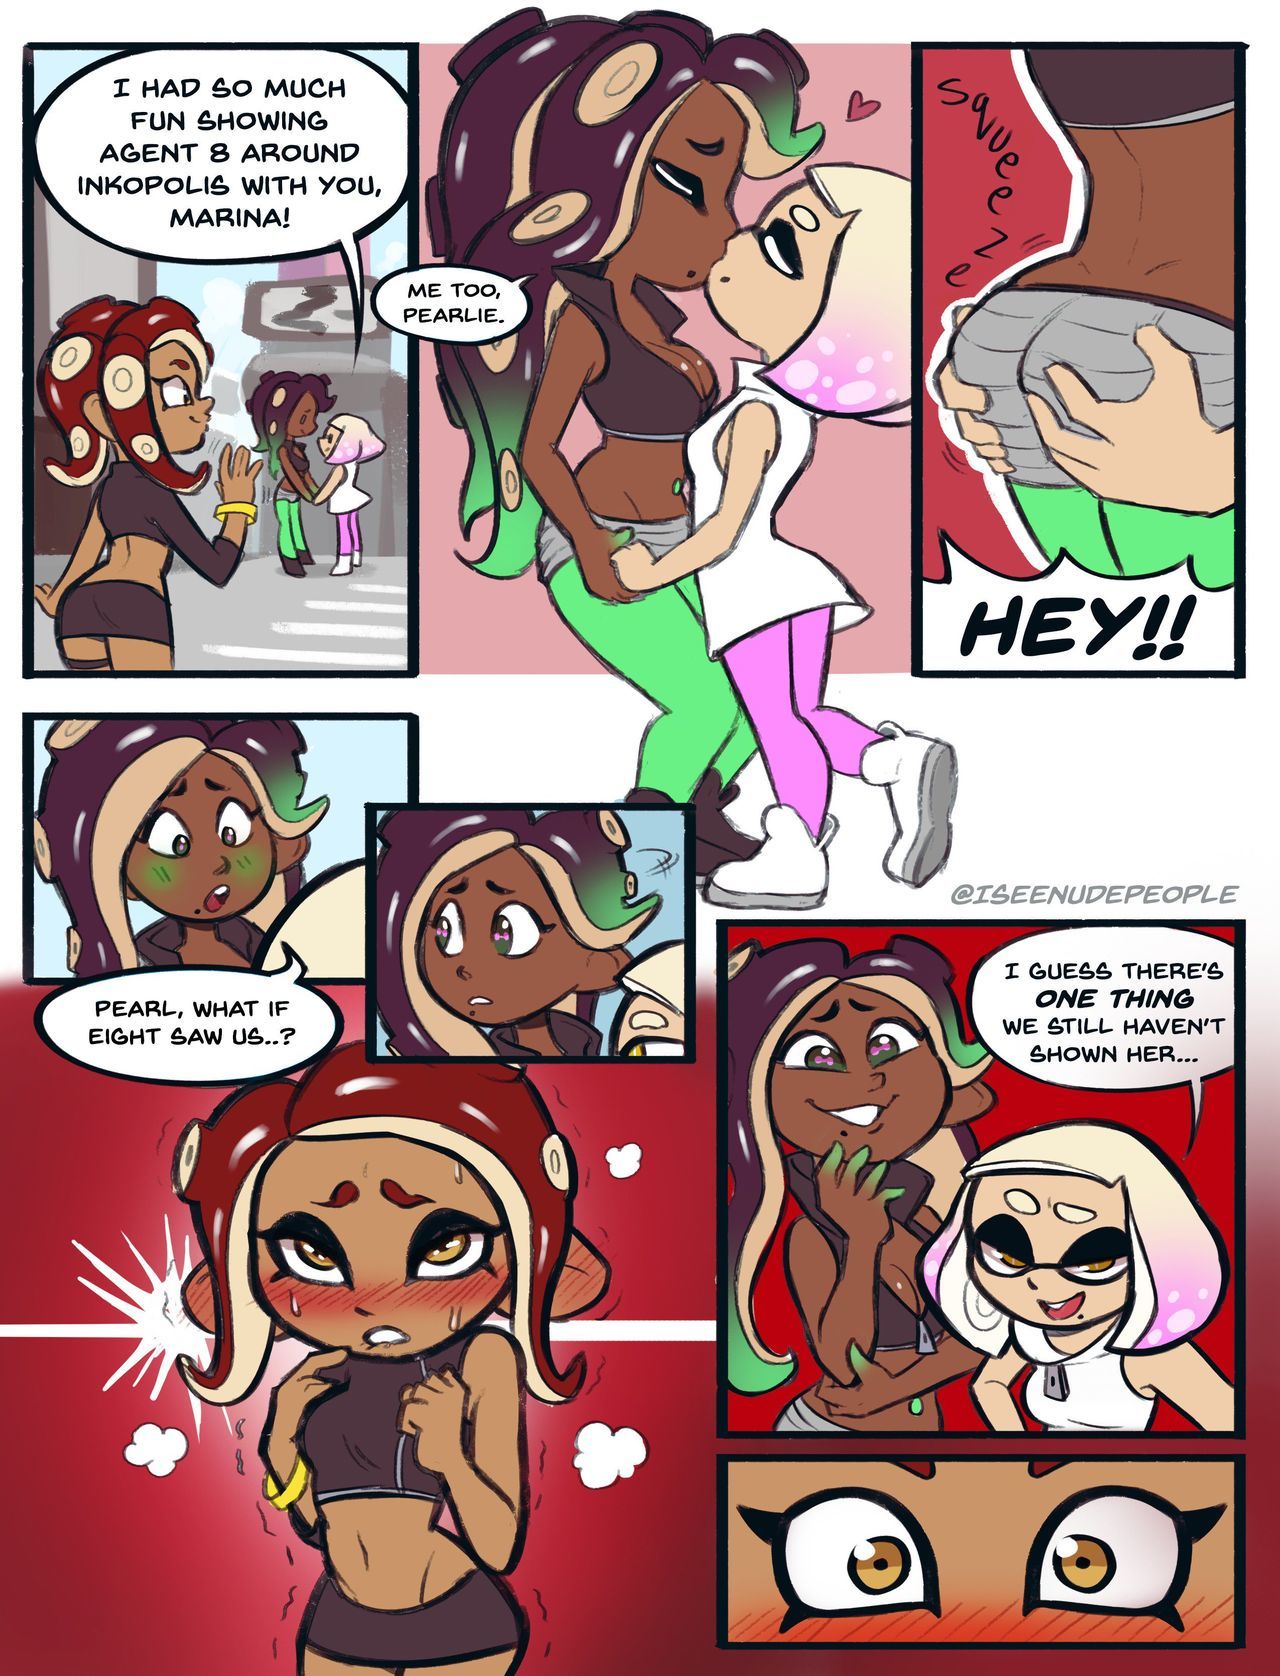 A Date with 8 - IseeNudePeople [Splatoon] page 1